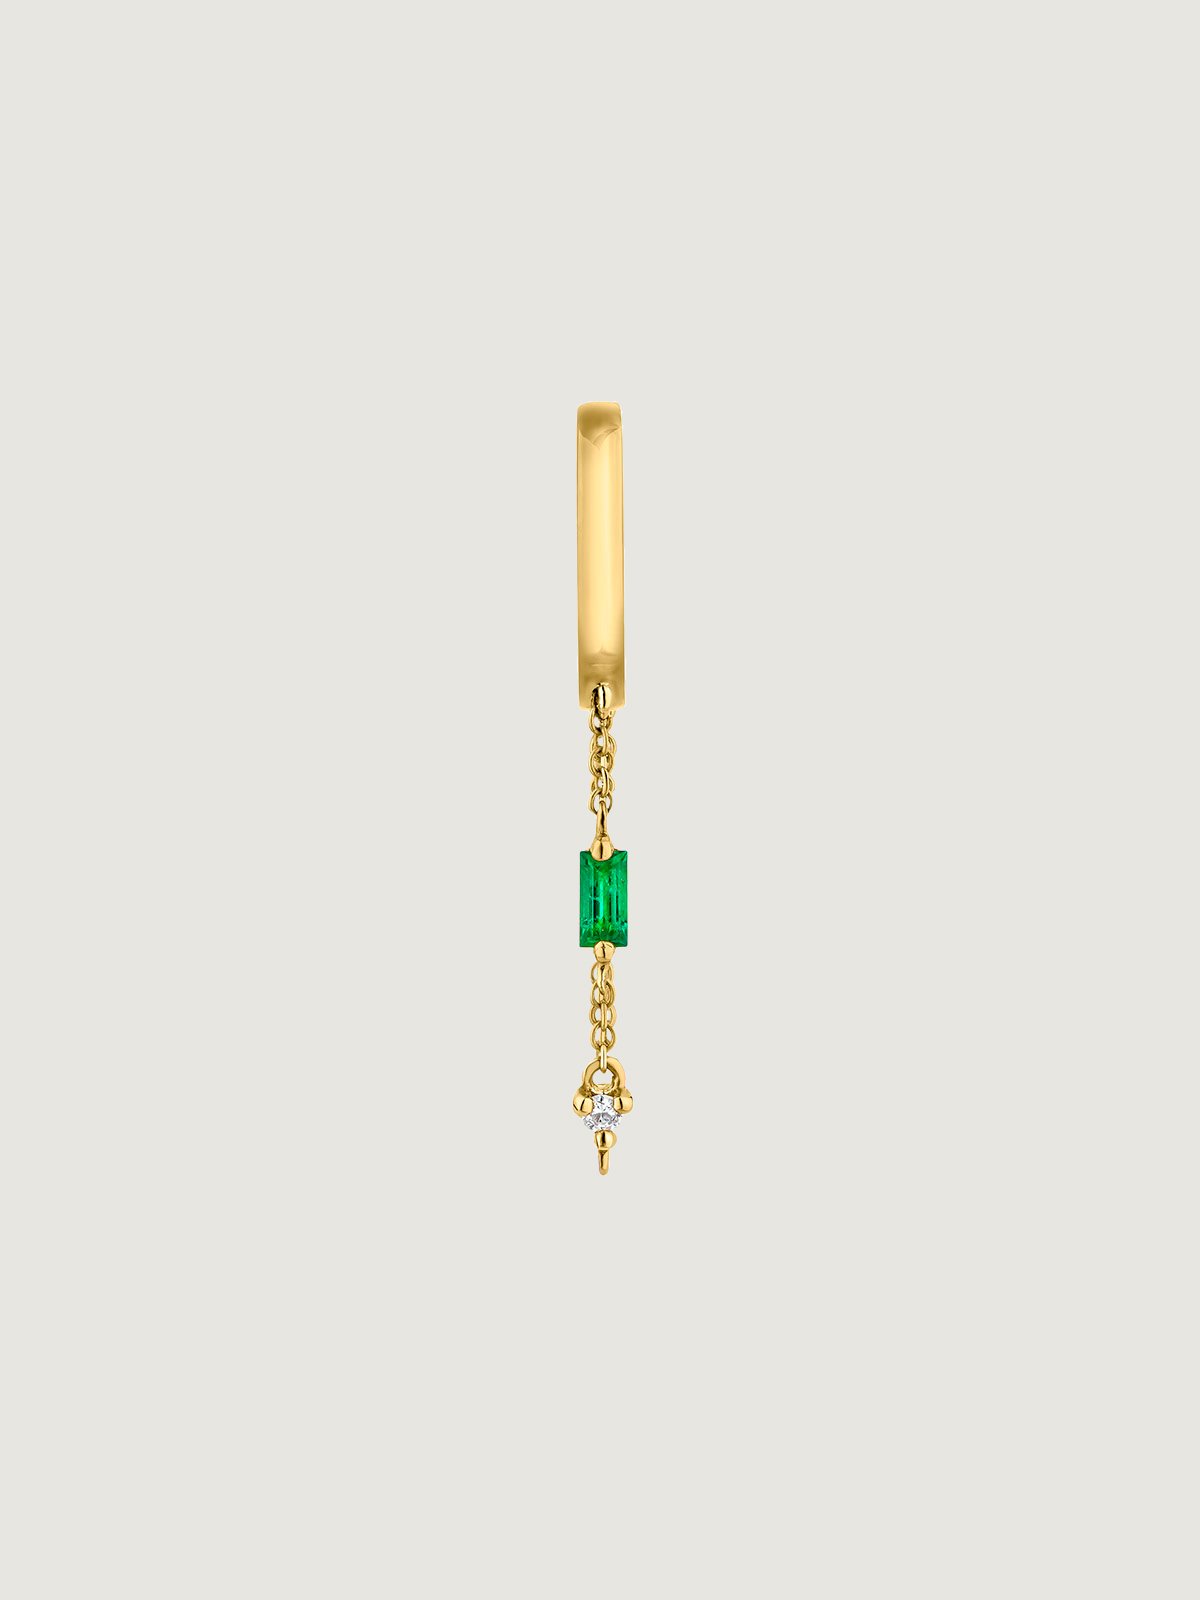 Single 9K yellow gold hoop earring with chain, emerald and diamond.